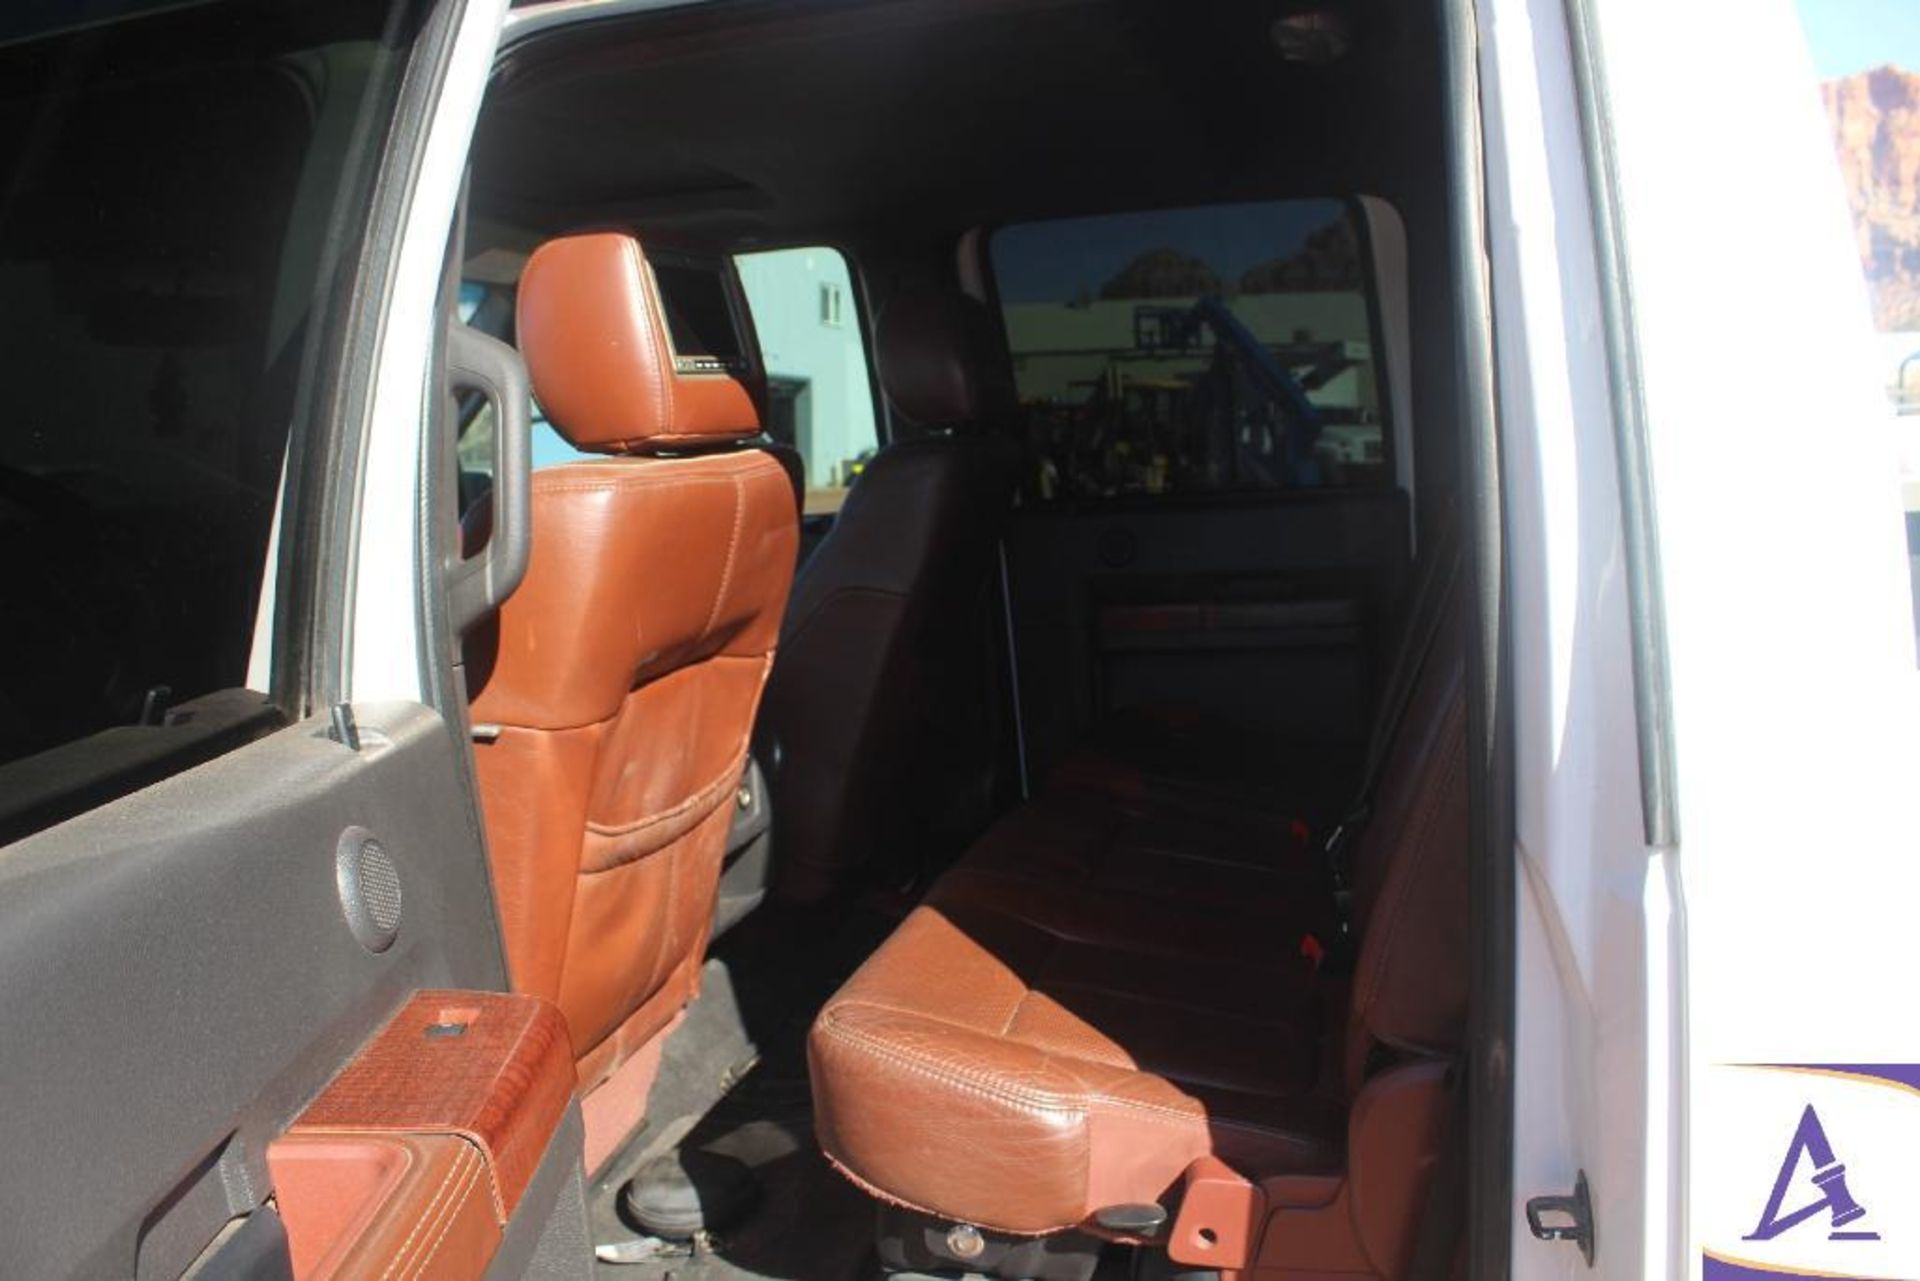 2011 F-250 4X4 Lariat Super Duty King Ranch - Image 13 of 27